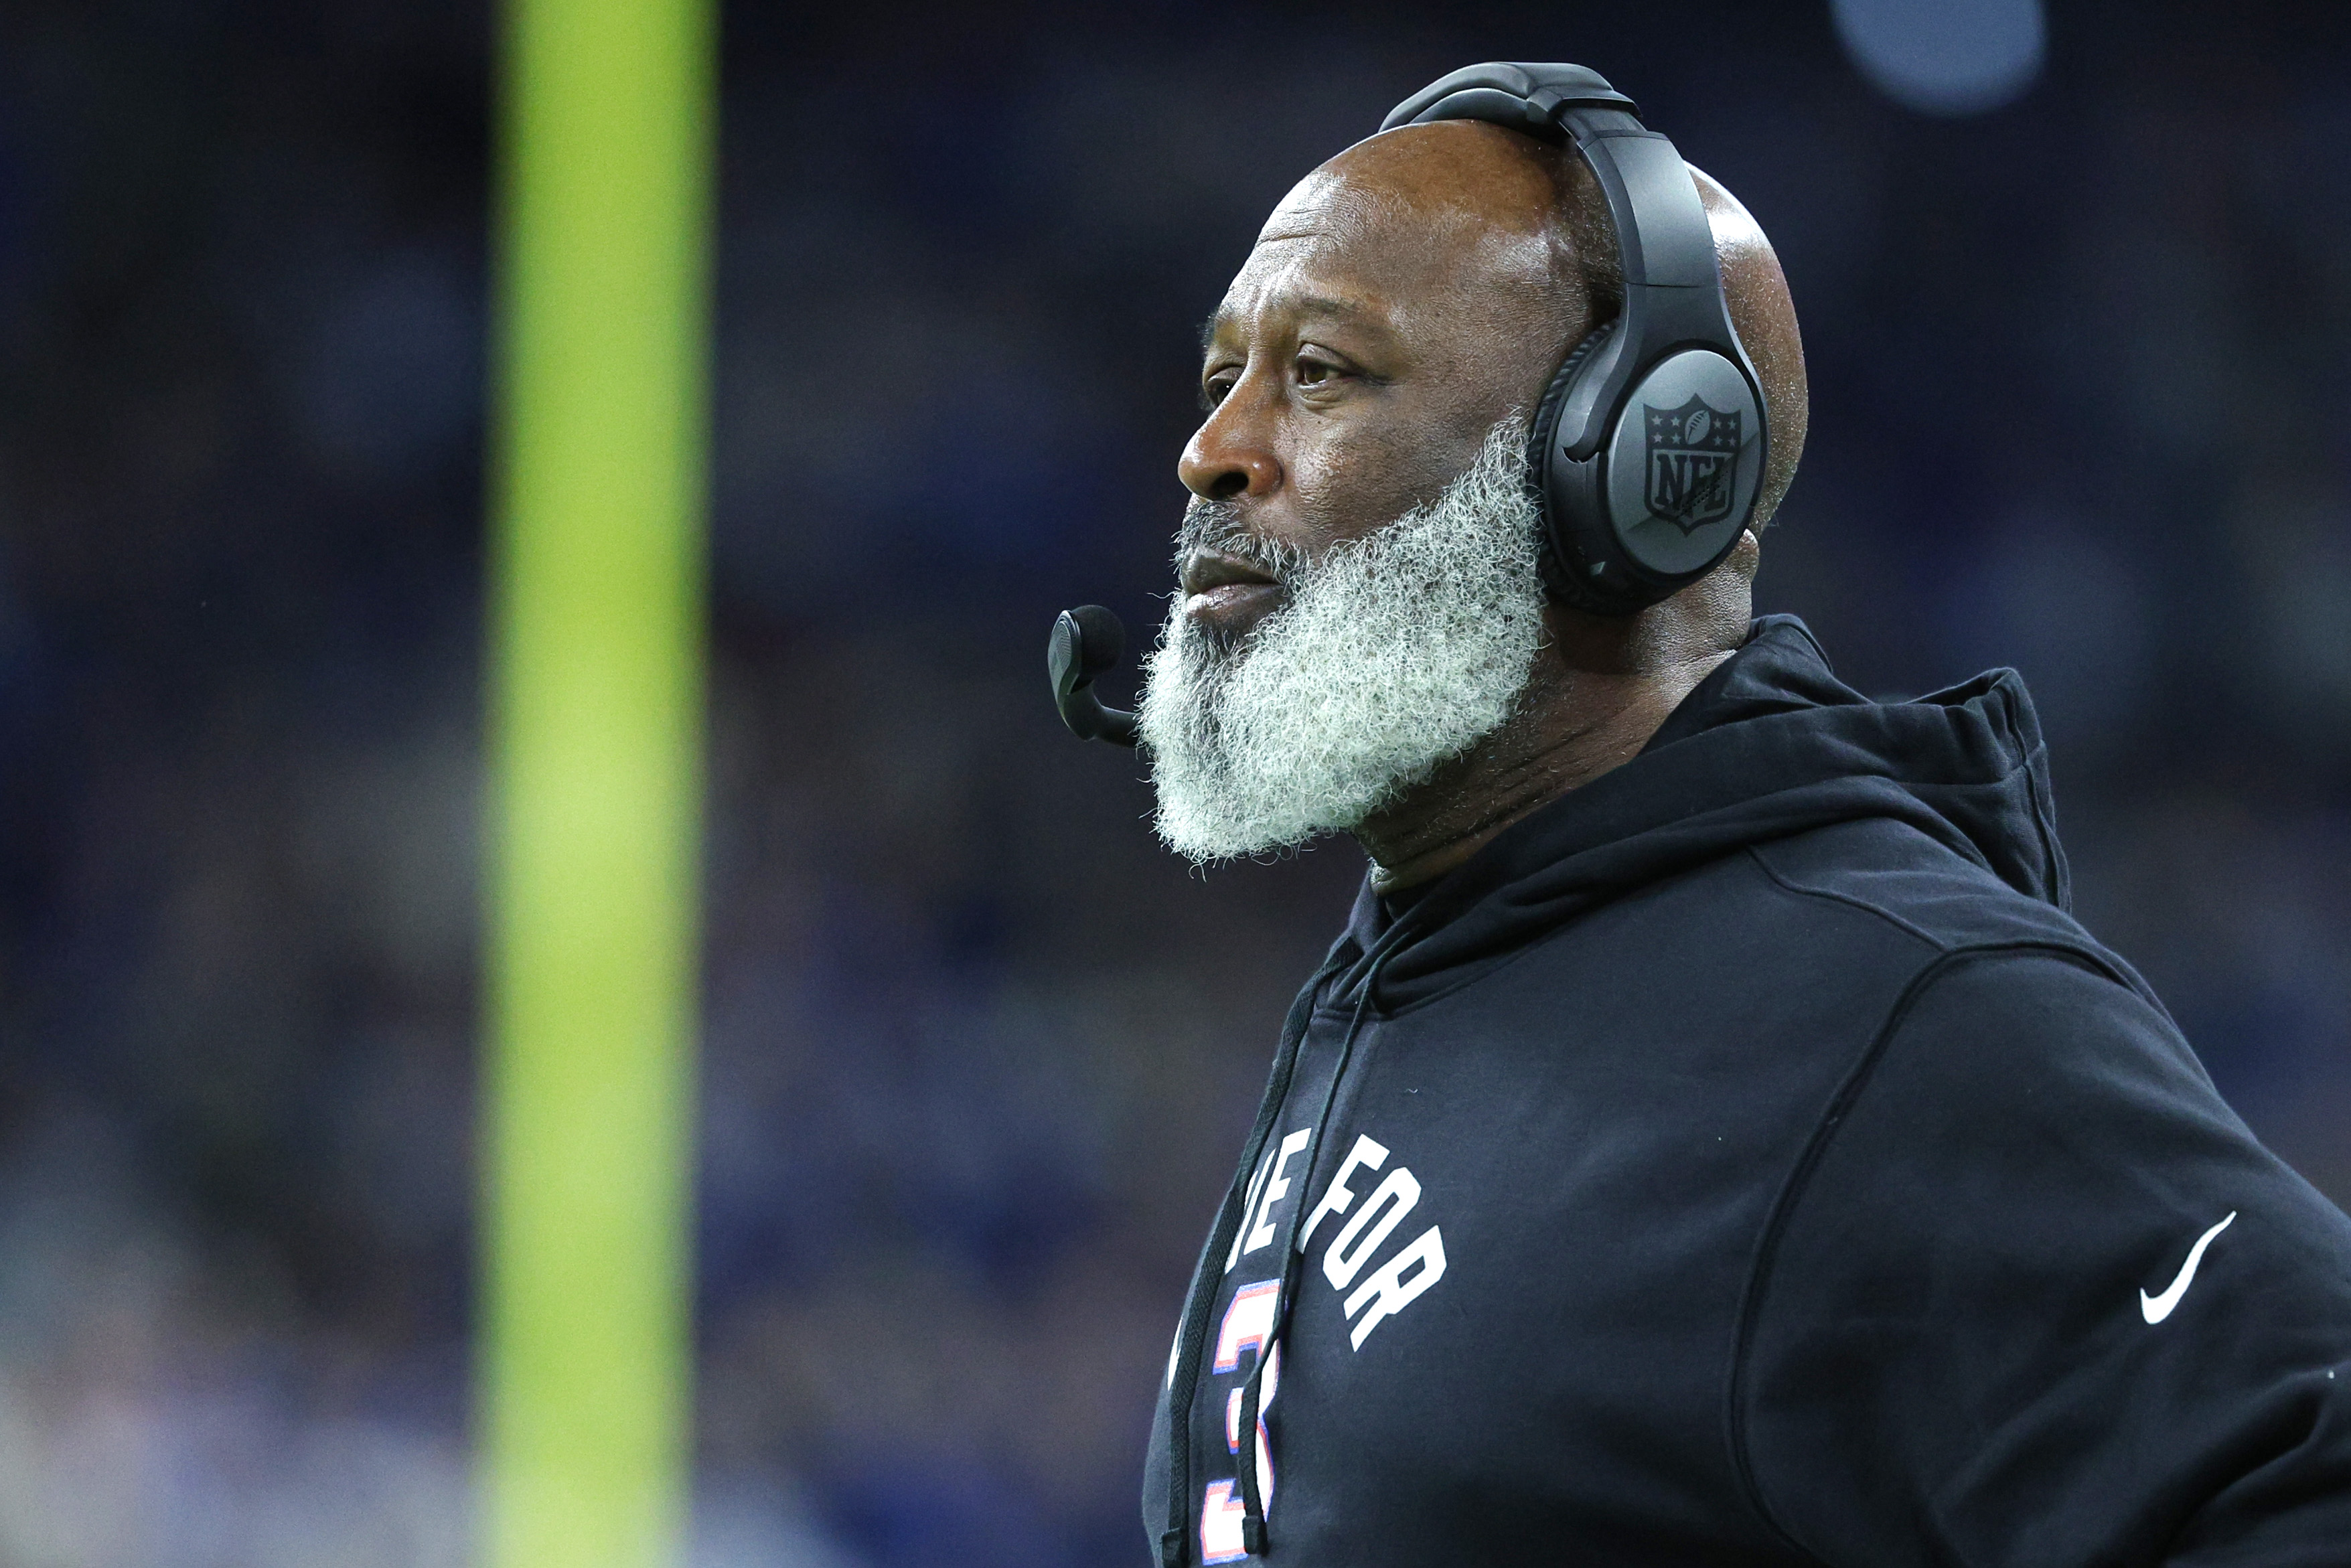 Lovie Smith, head coach of the Houston Texans, looks on during the game against then Indianapolis Colts at Lucas Oil Stadium in Indianapolis, Indiana, January 8, 2023. /CFP